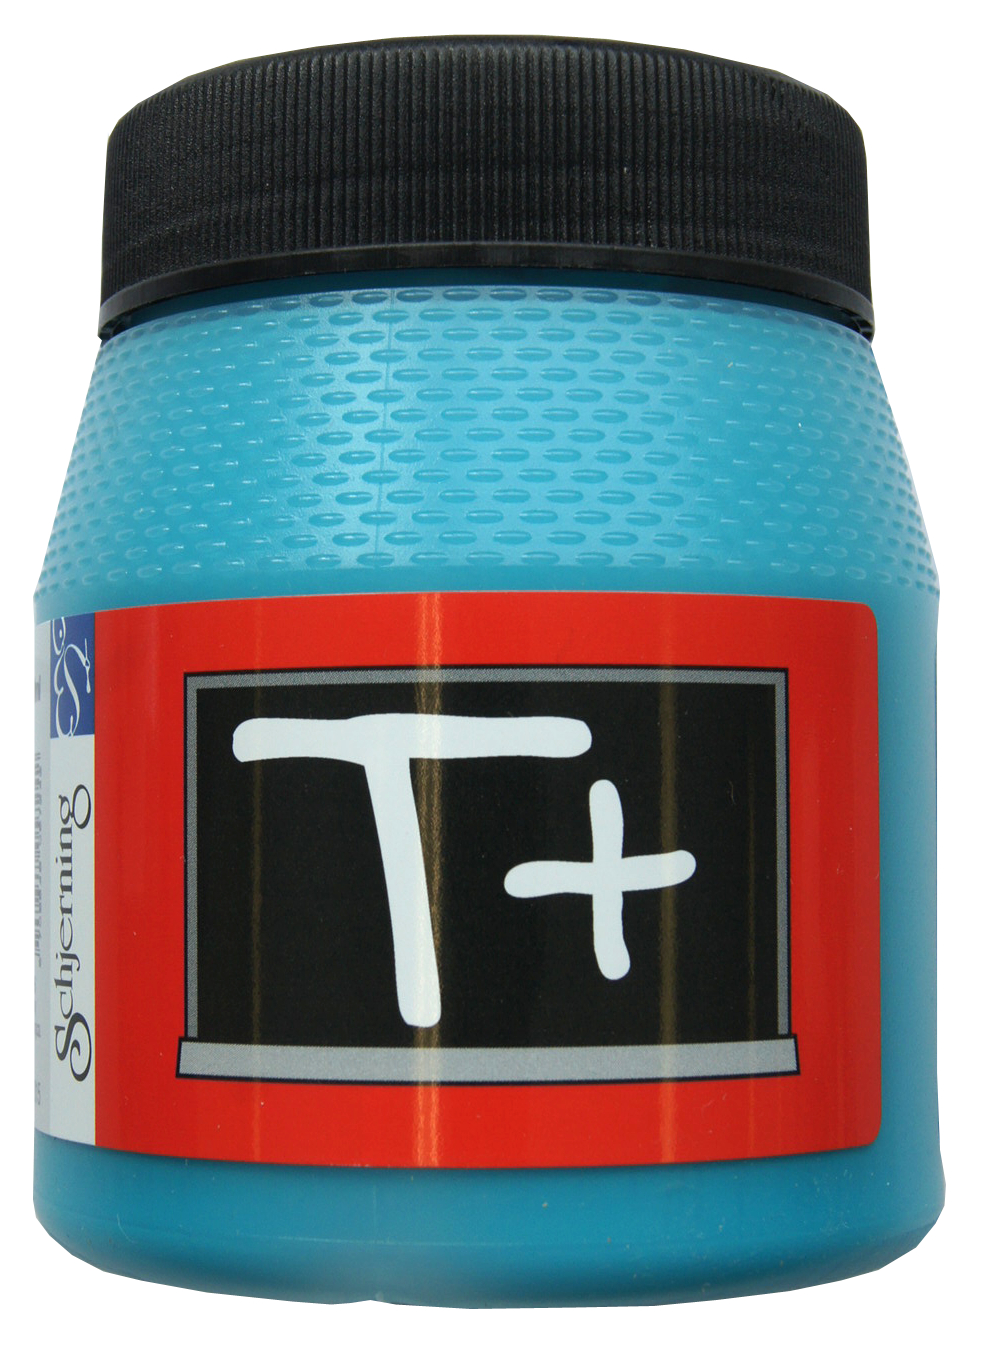 SCHJERNING Painture Tableau 250ml 53133 turquoise 6167 turquoise 6167